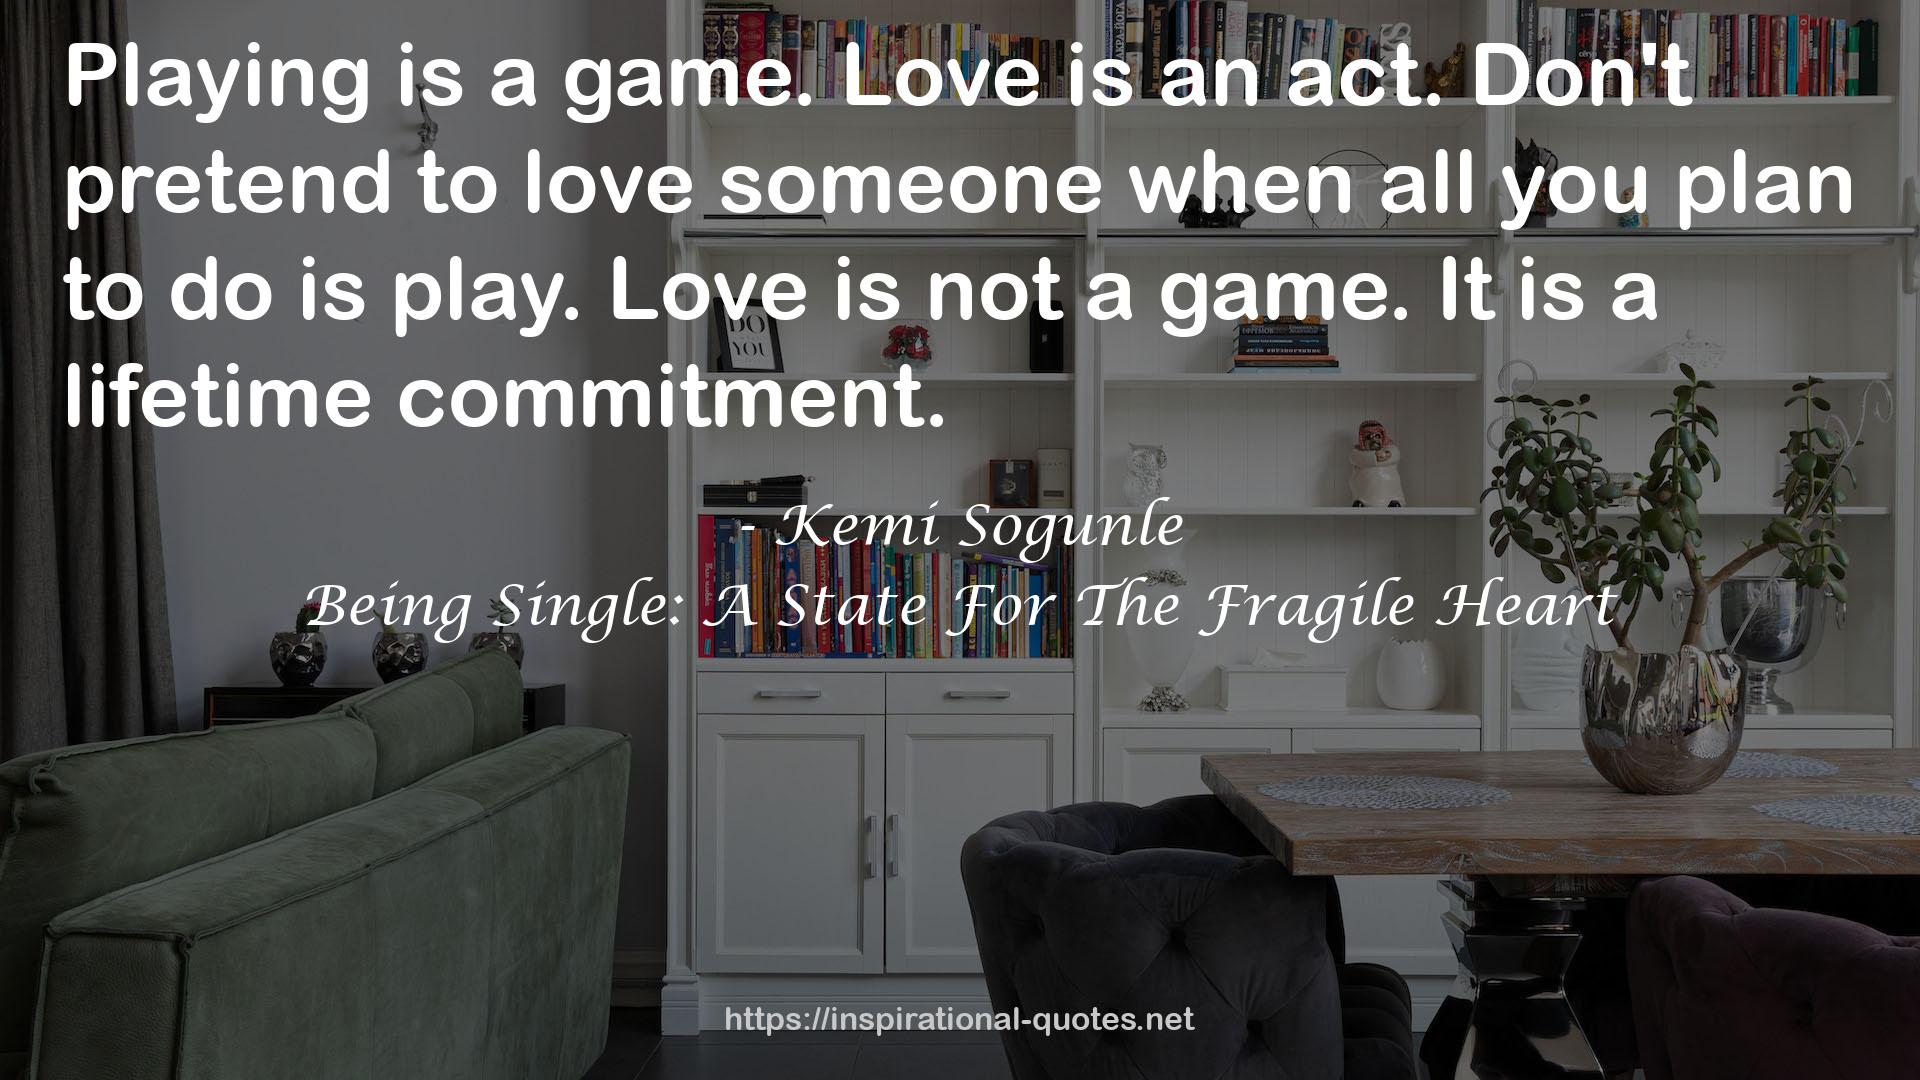 Being Single: A State For The Fragile Heart QUOTES